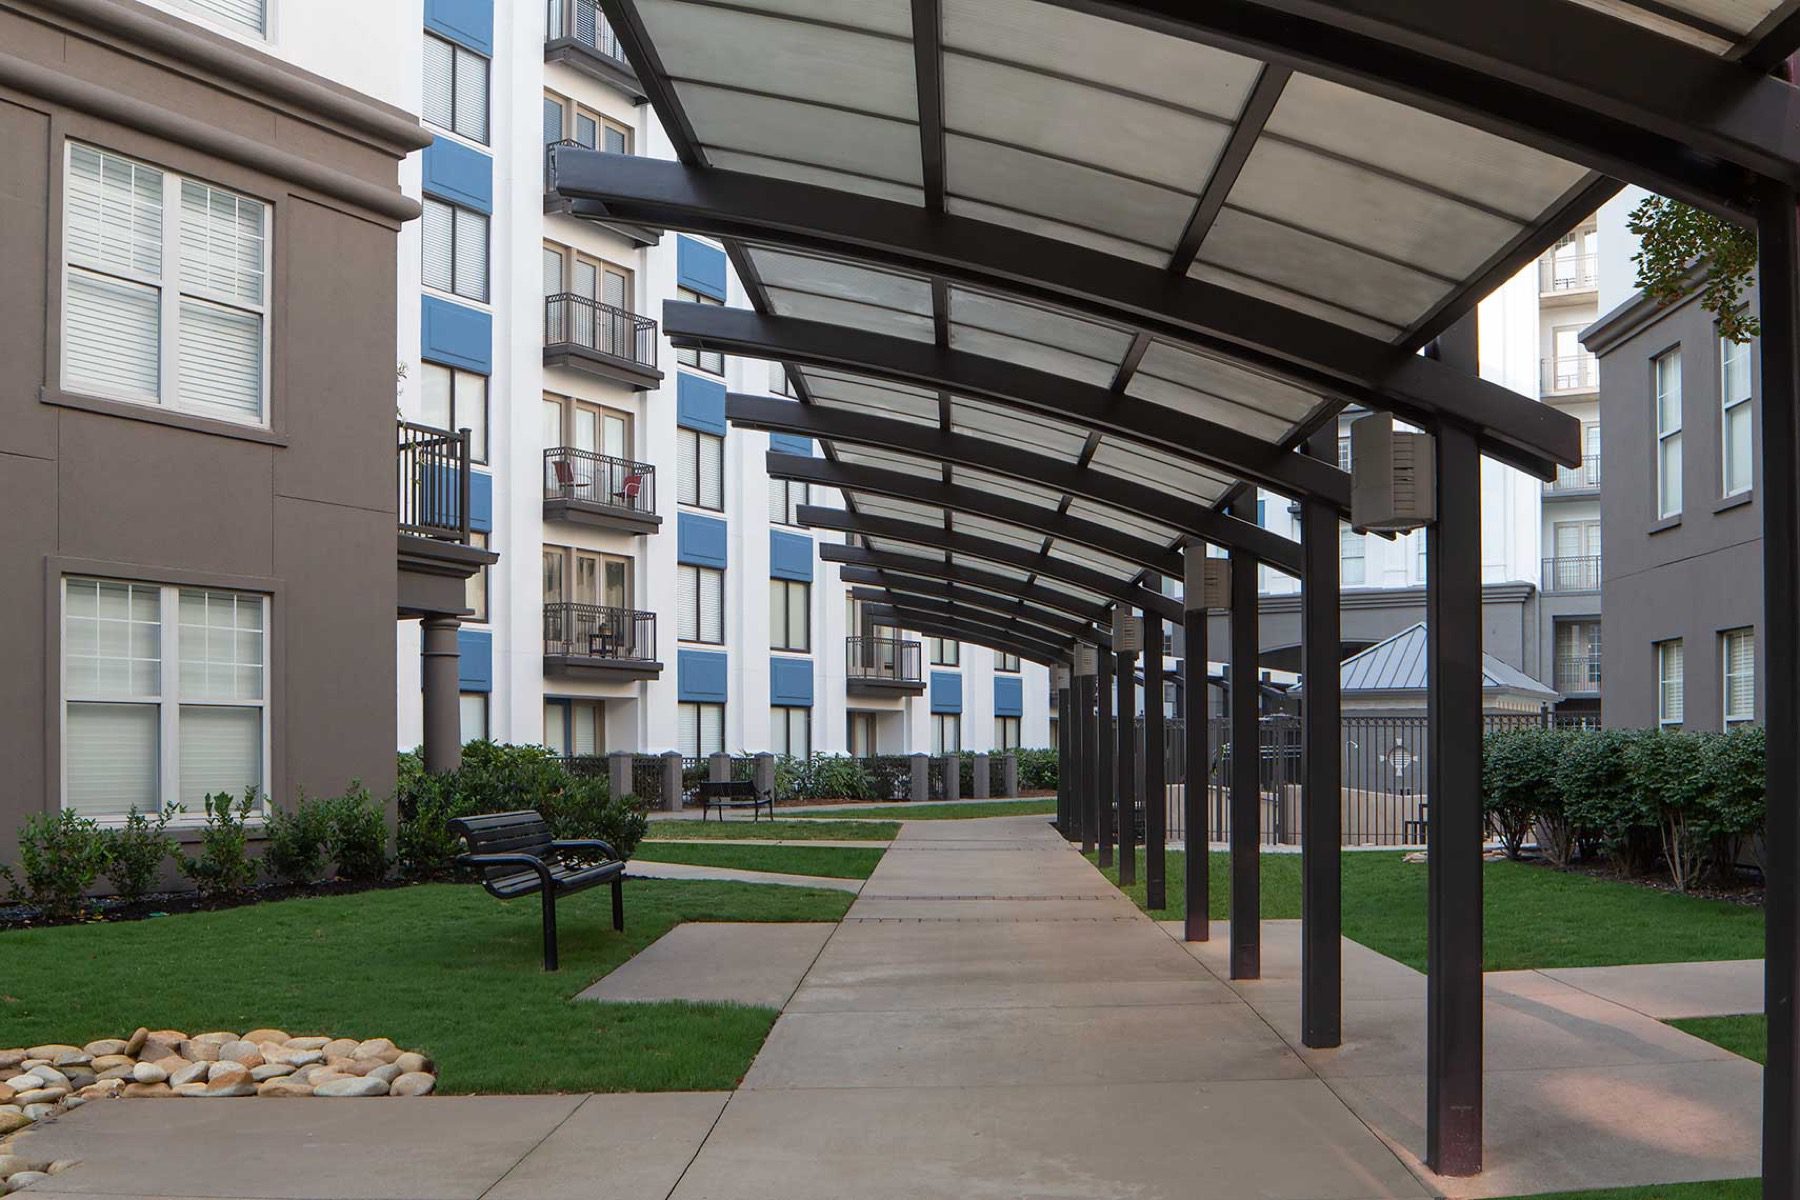 Community building with a covered walkway shelter providing sheltered passage